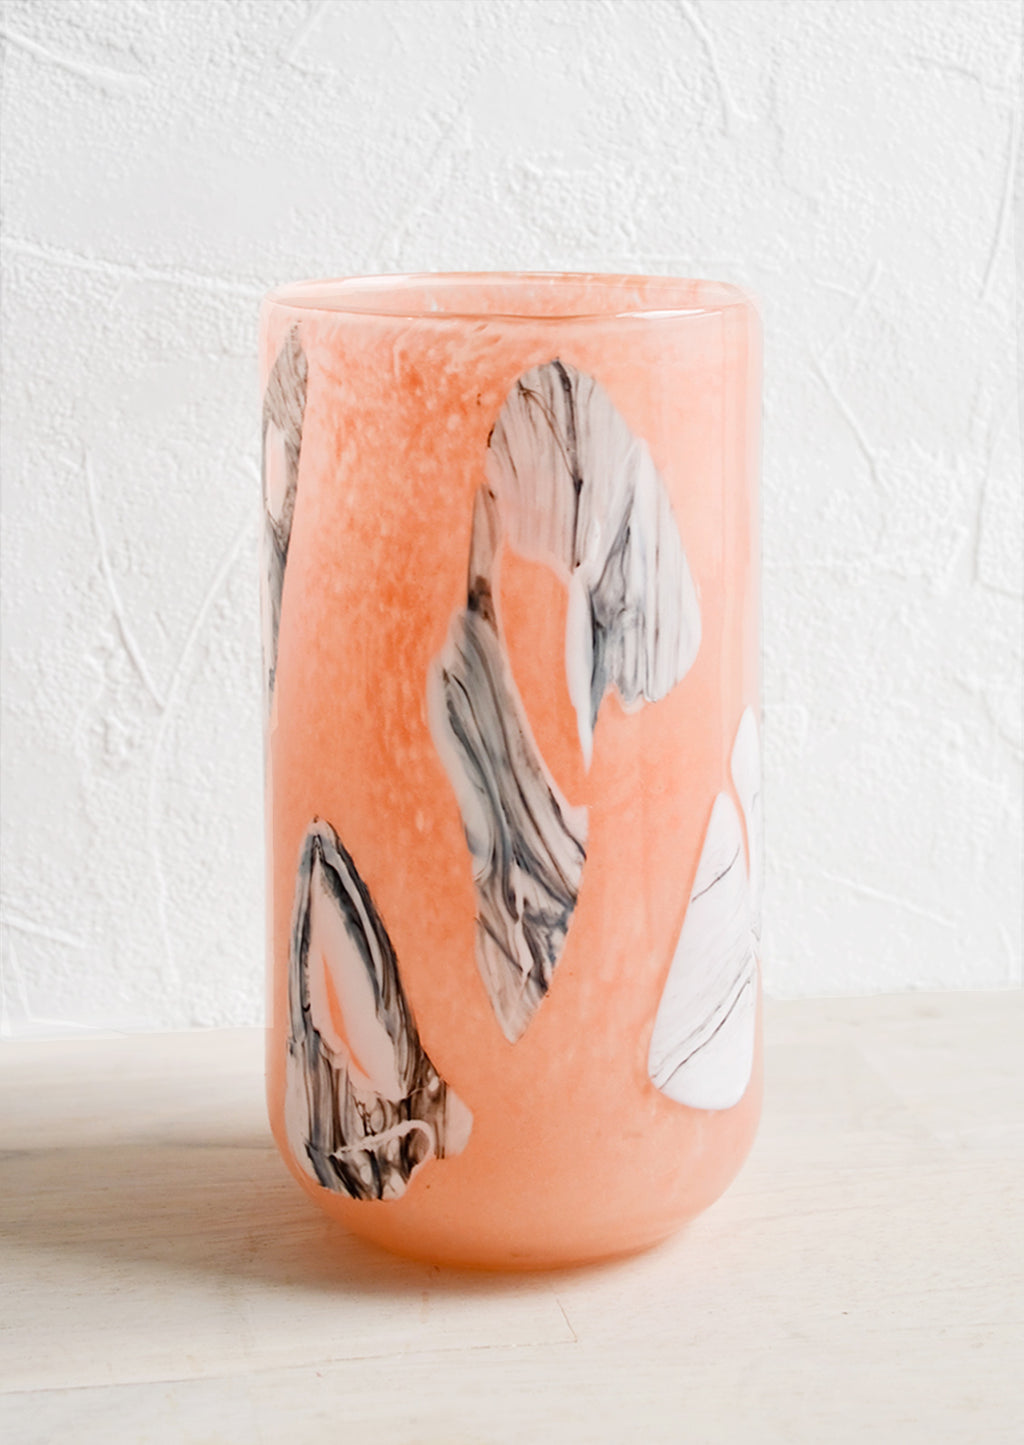 1: Peach glass vase with white and grey inlay pattern.